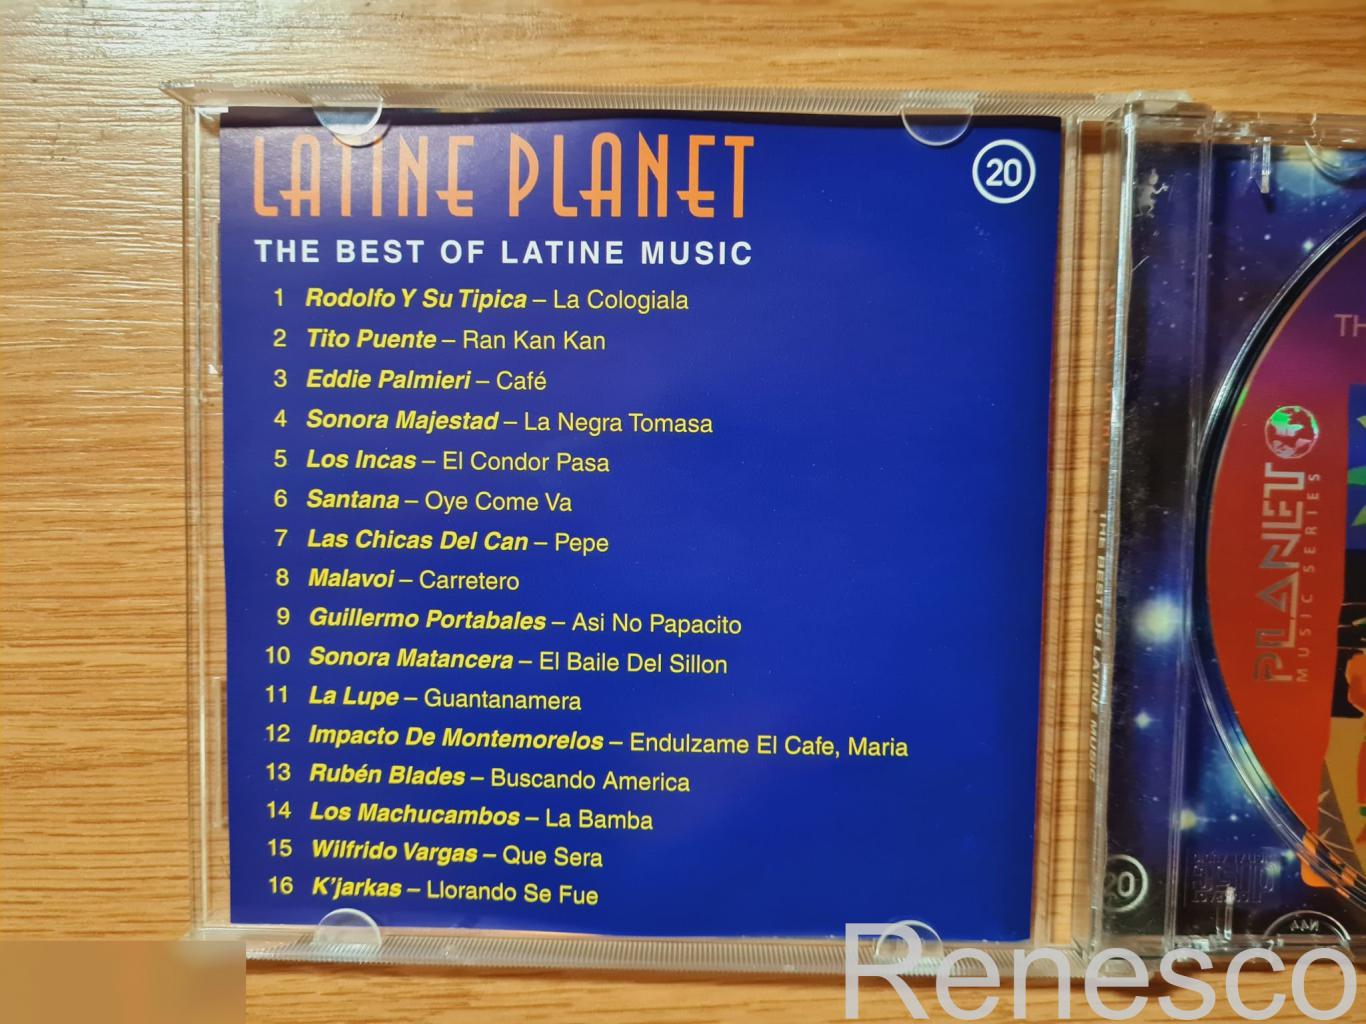 Planete Latine - The Best Of Latin Music (Russia) (Unofficial) 3